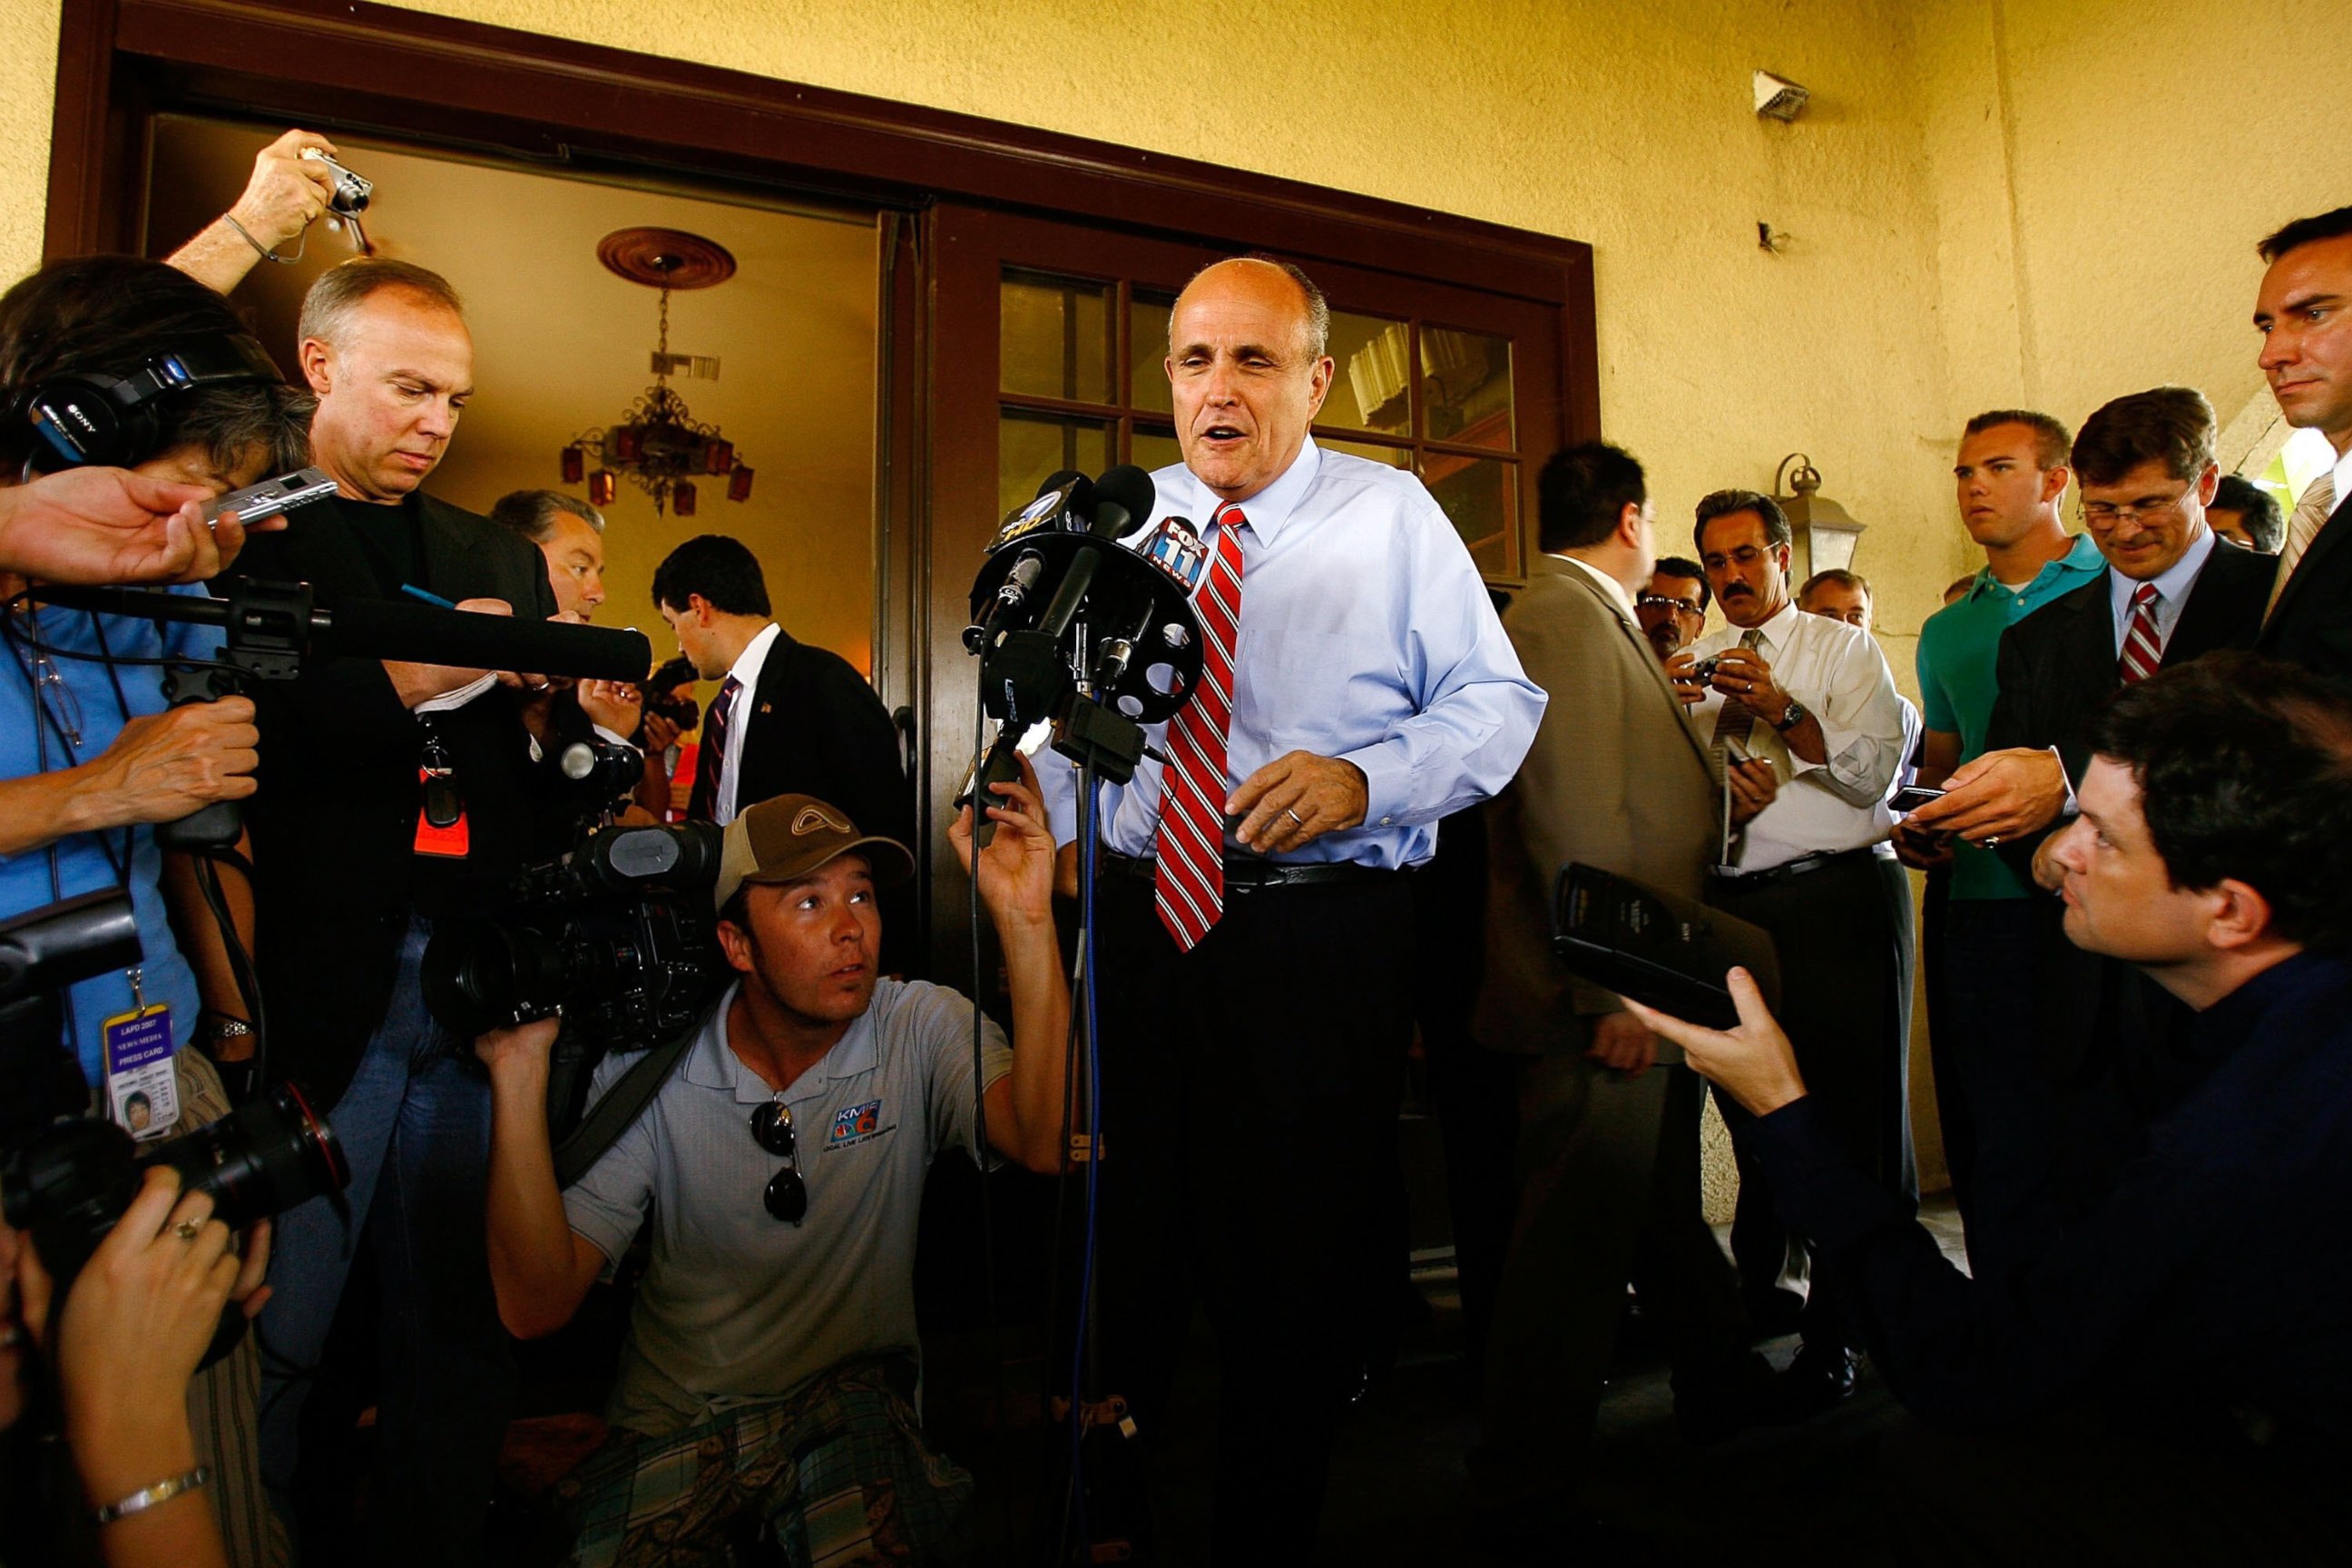 PHOTO: Republican presidential nomination hopeful, former New York City Mayor Rudy Giuliani, talks to the reporters as he campaigns, July 24, 2007, in Riverside, California.